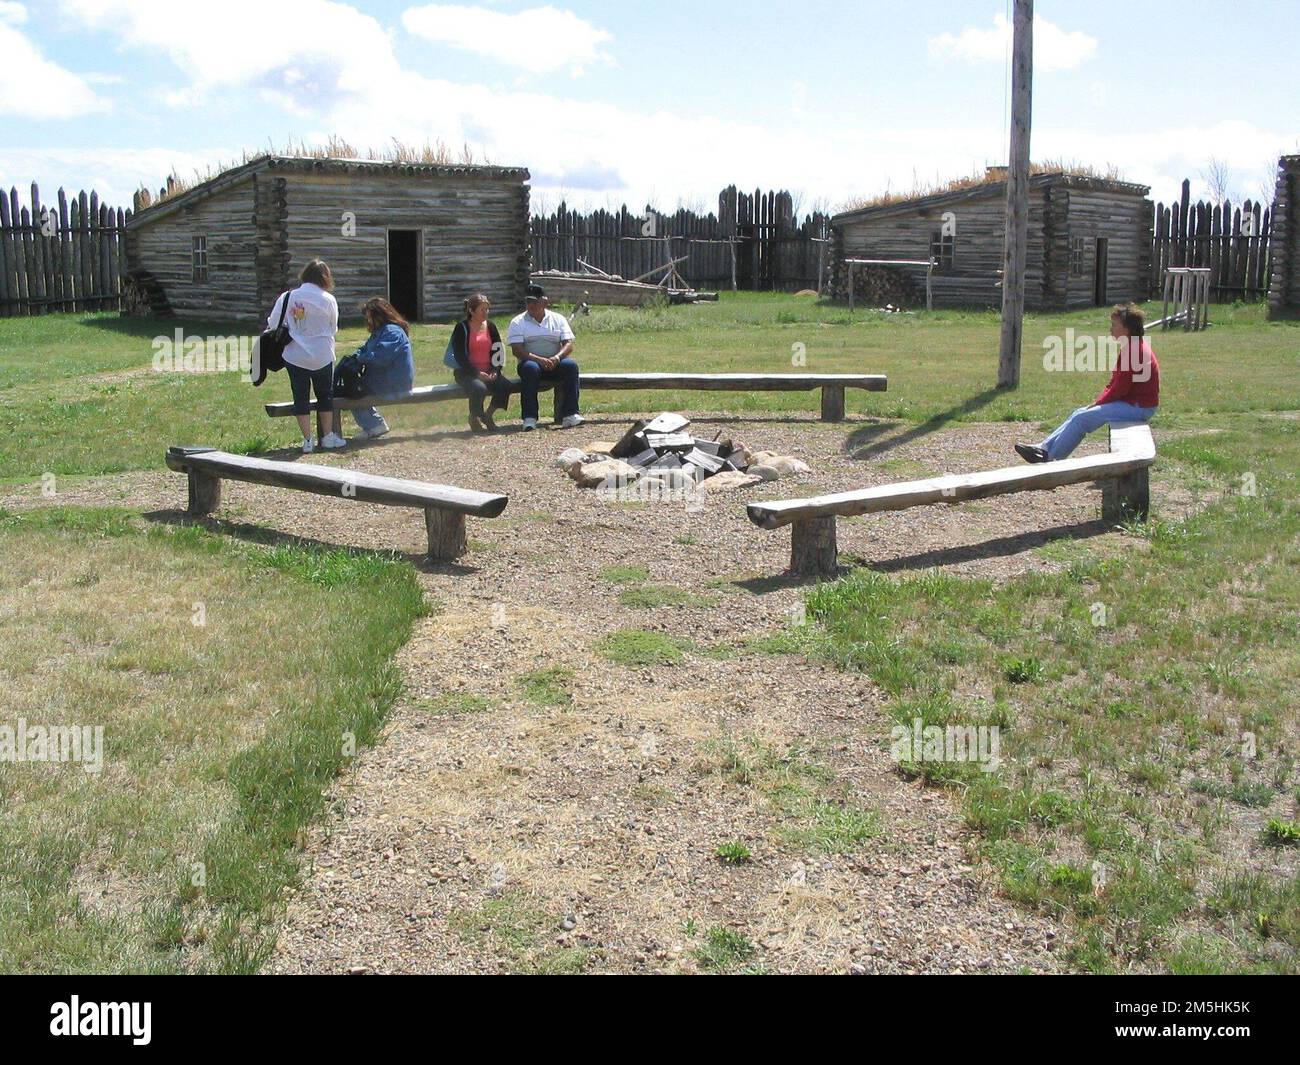 Native American Scenic Byway - Fort Manuel Lisa. Byway visitors rest on these benches in the center of restored Fort Manuel Lisa. The outbuildings and living quarters were reconstructed to match historical descriptions. Location: Near Kenel, South Dakota (45.858° N 100.460° W) Stock Photo